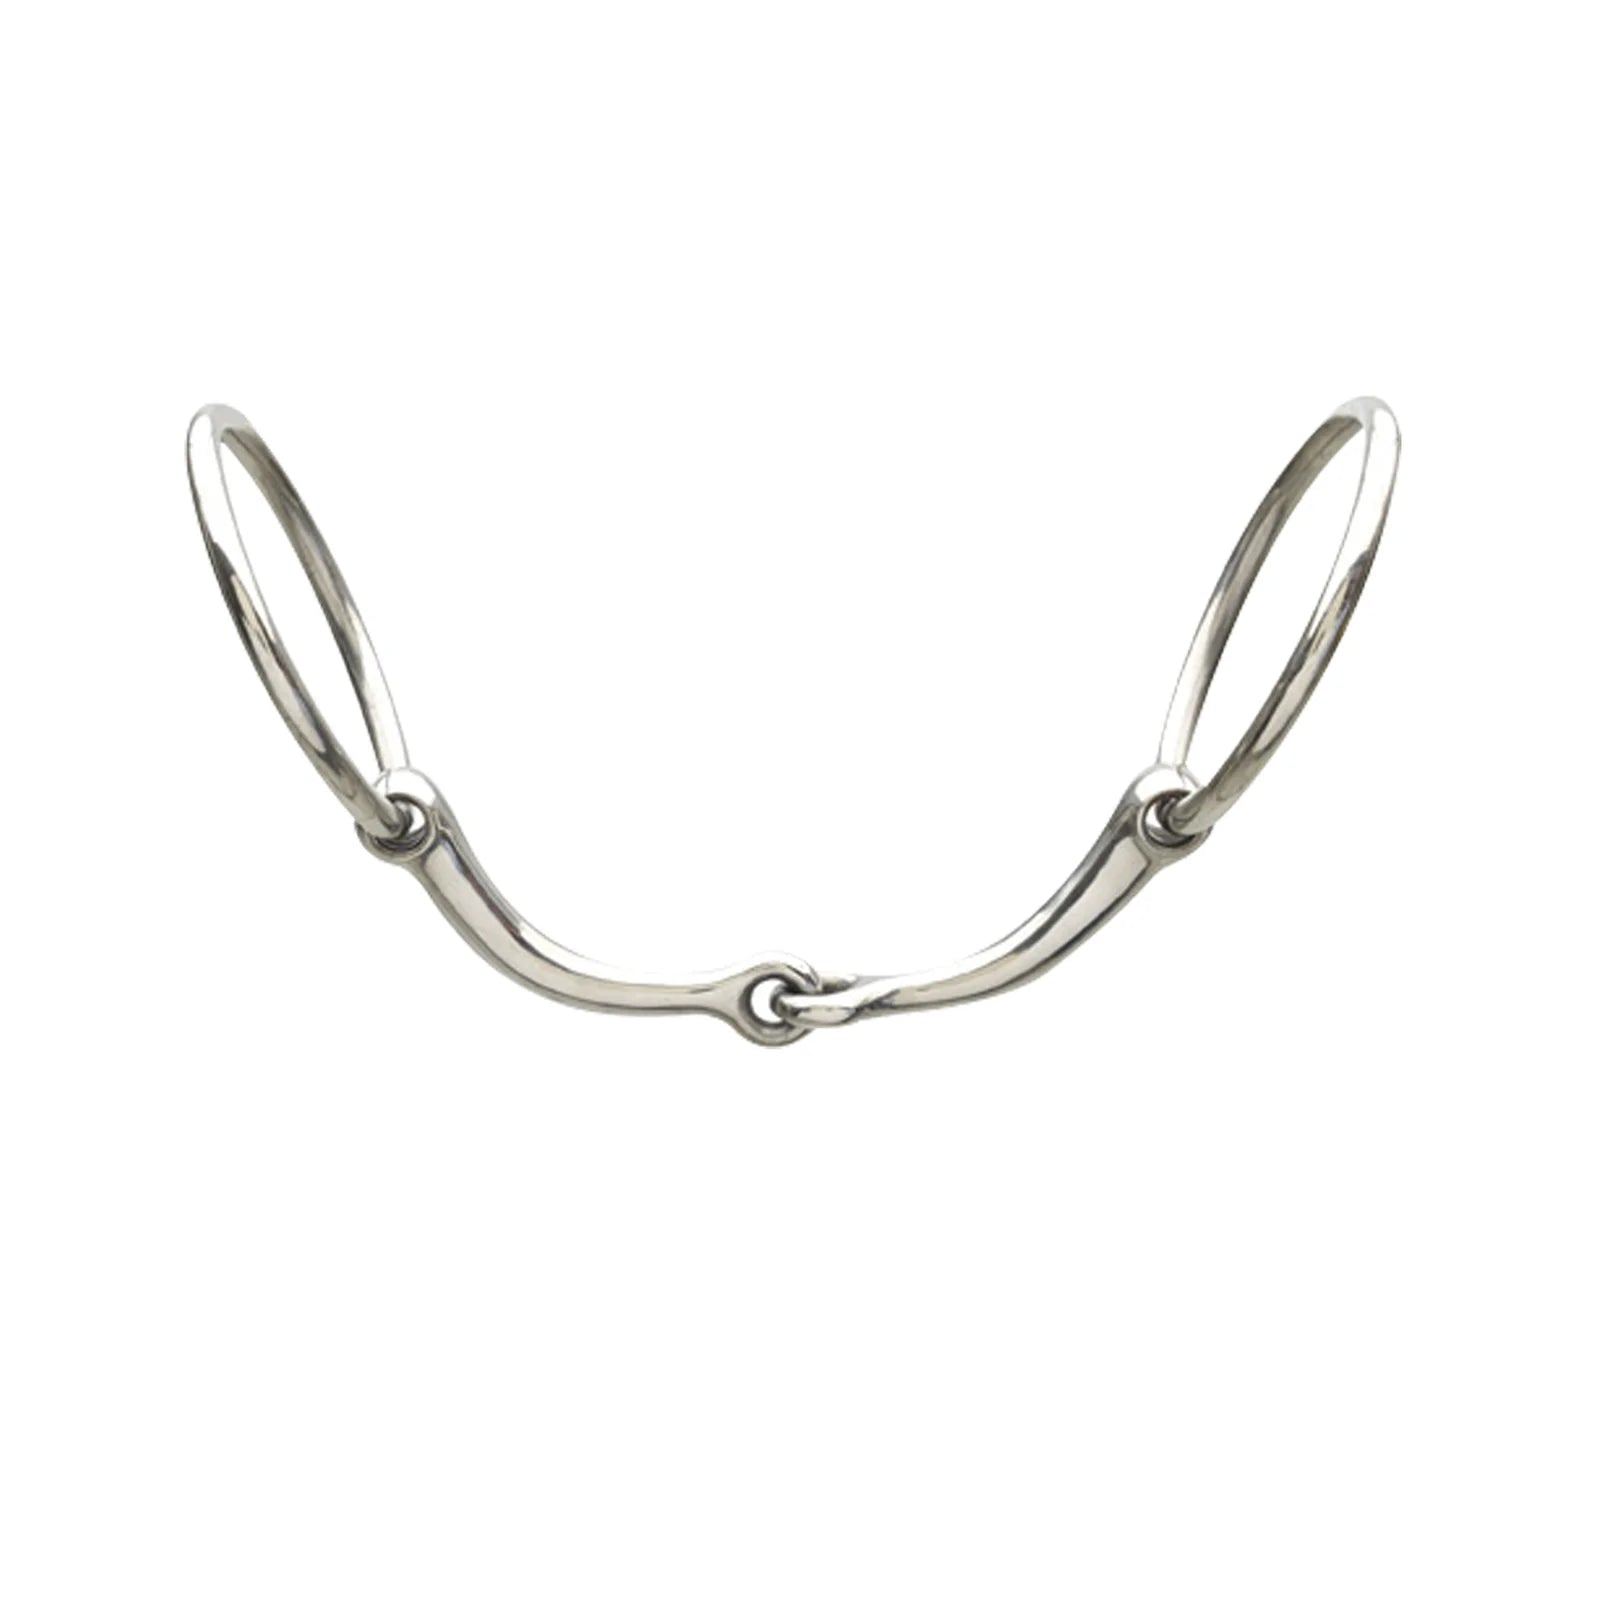 Centaur Ovation Curve Loose Ring Snaffle for comfortable horse communication by Gee Gee Equine